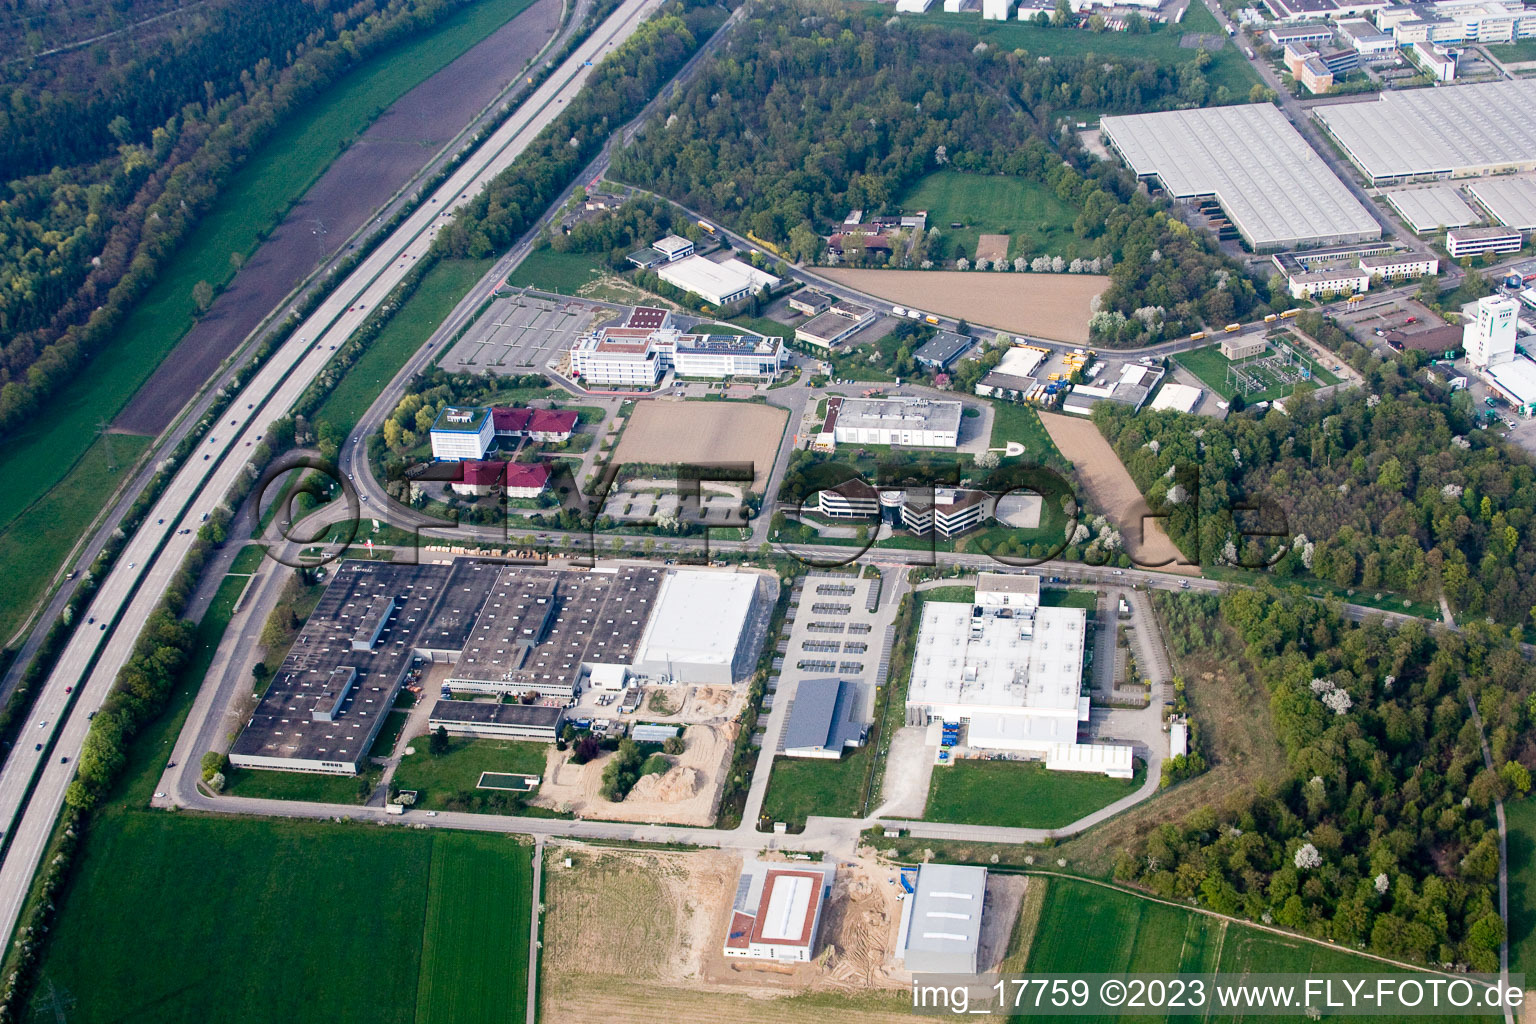 Aerial view of FlowServe Flow Control in the district Bruchhausen in Ettlingen in the state Baden-Wuerttemberg, Germany